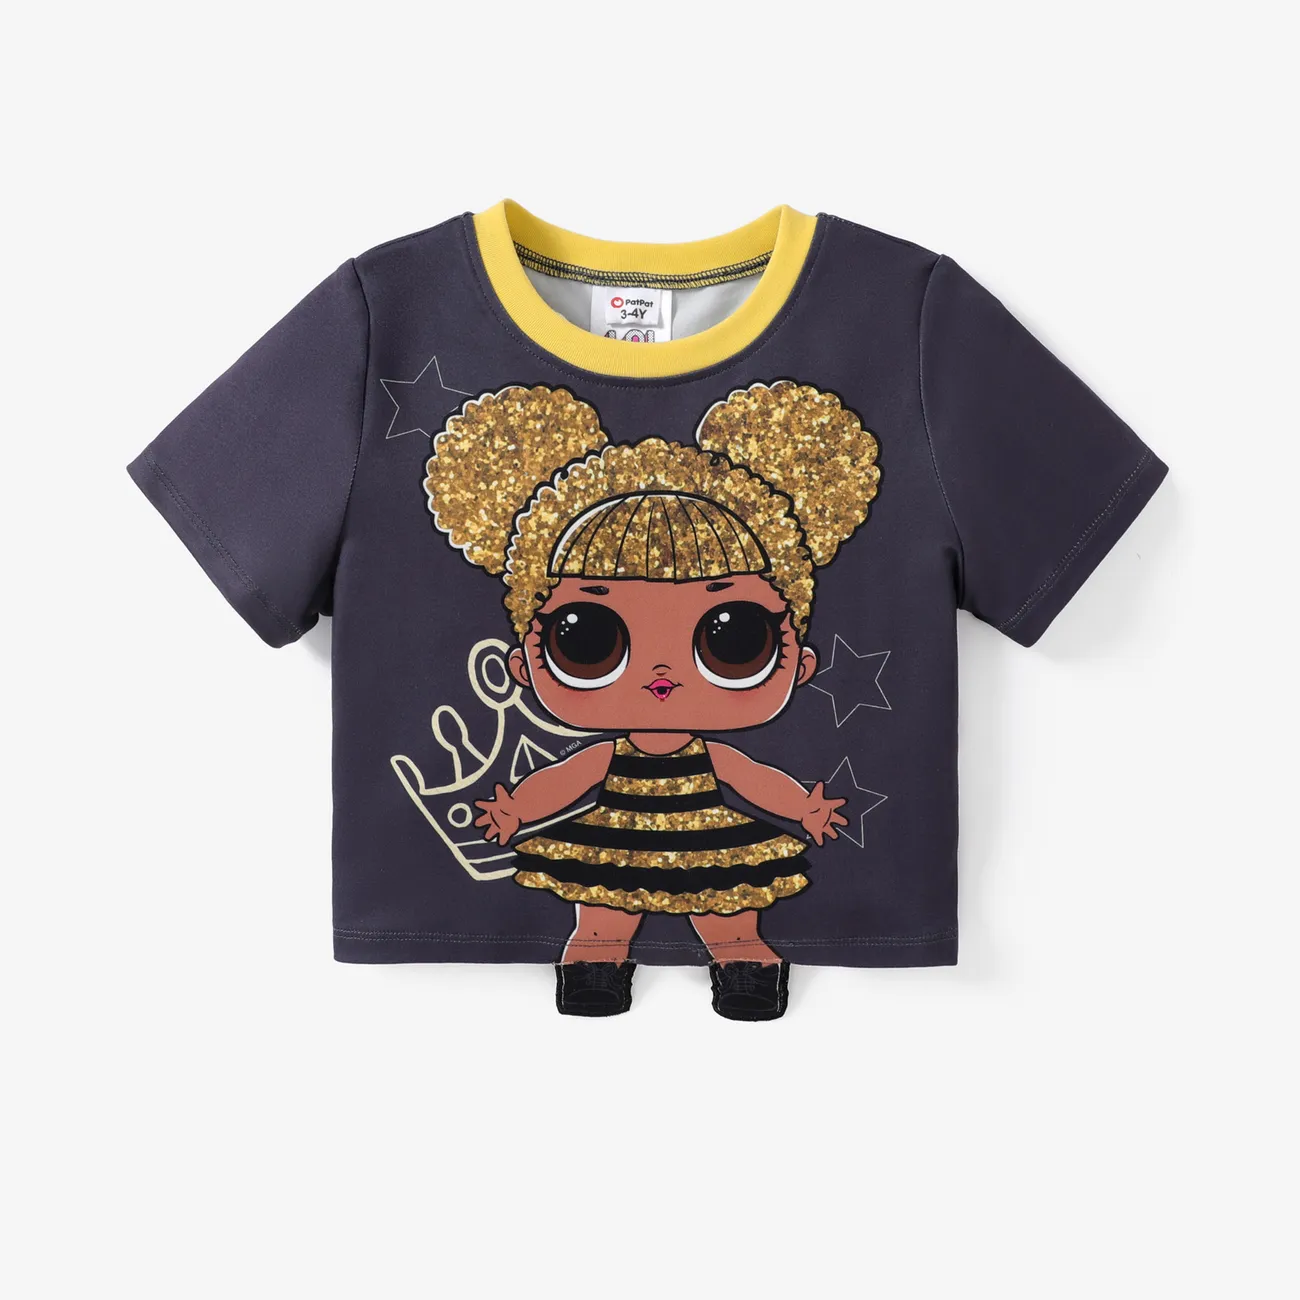 L.O.L. SURPRISE! Toddler/Kid Girl Graphic Print Short-sleeve Tee
 CharcoalGray big image 1